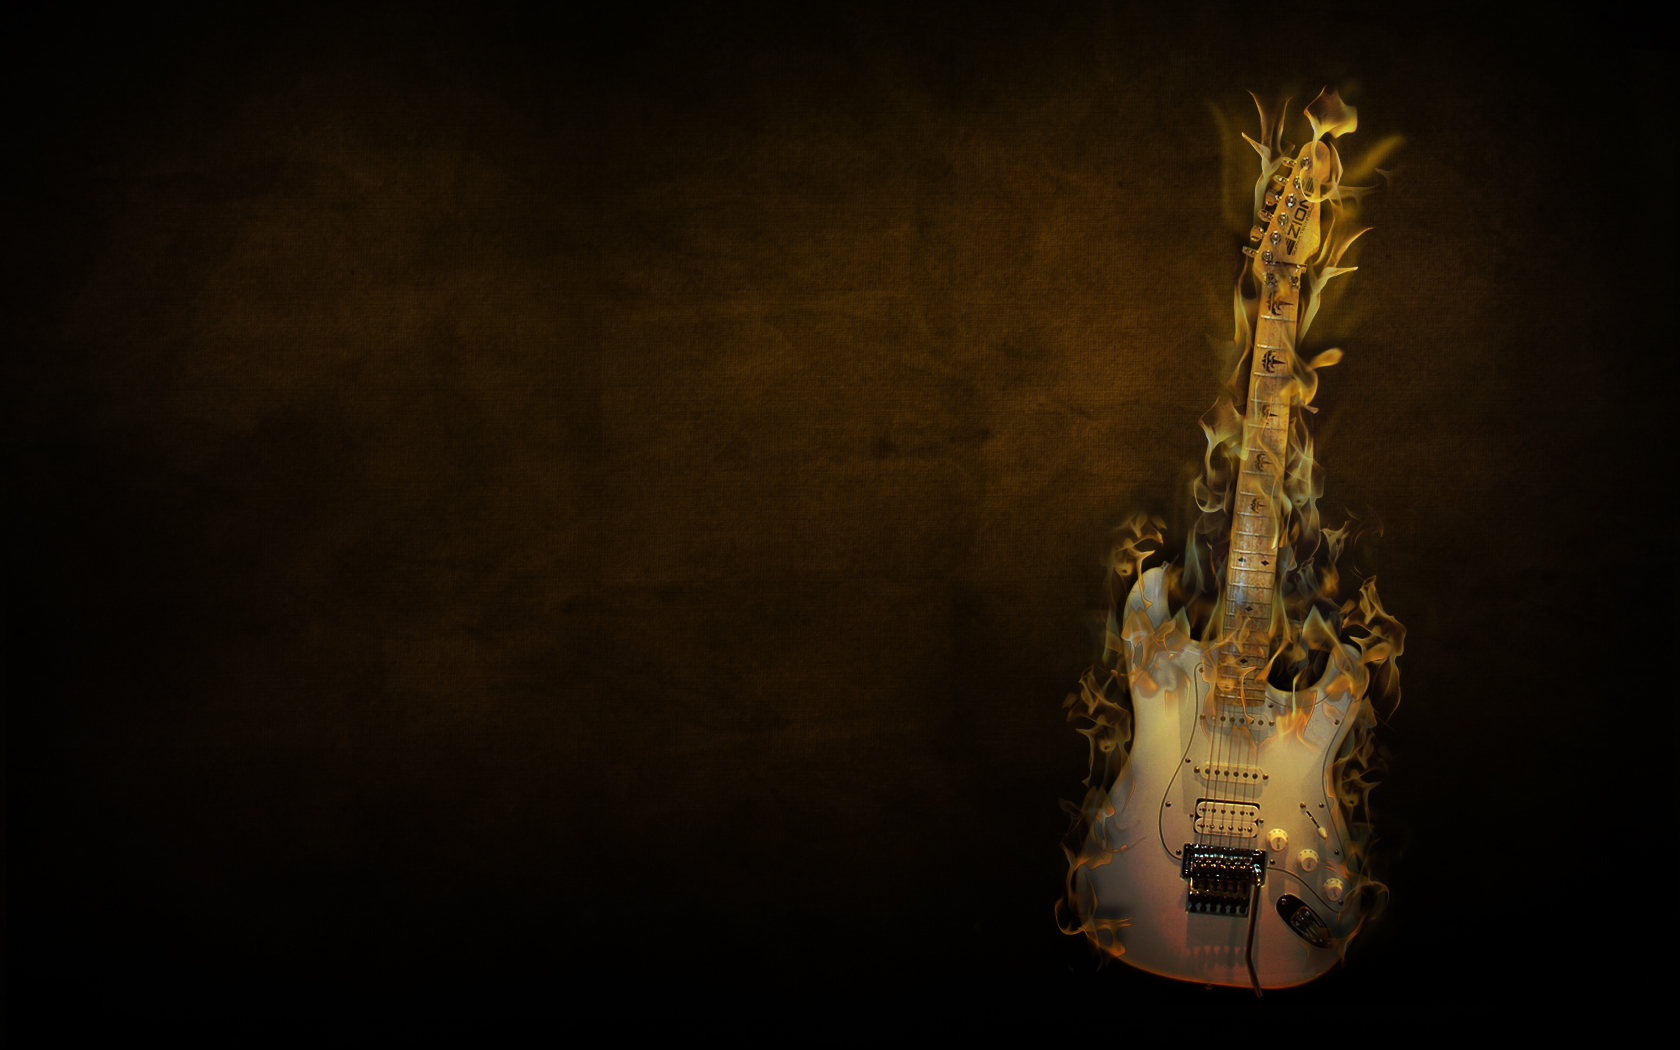 Free Guitar On Fire Wallpapers, Free Guitar On Fire HD Wallpapers ...